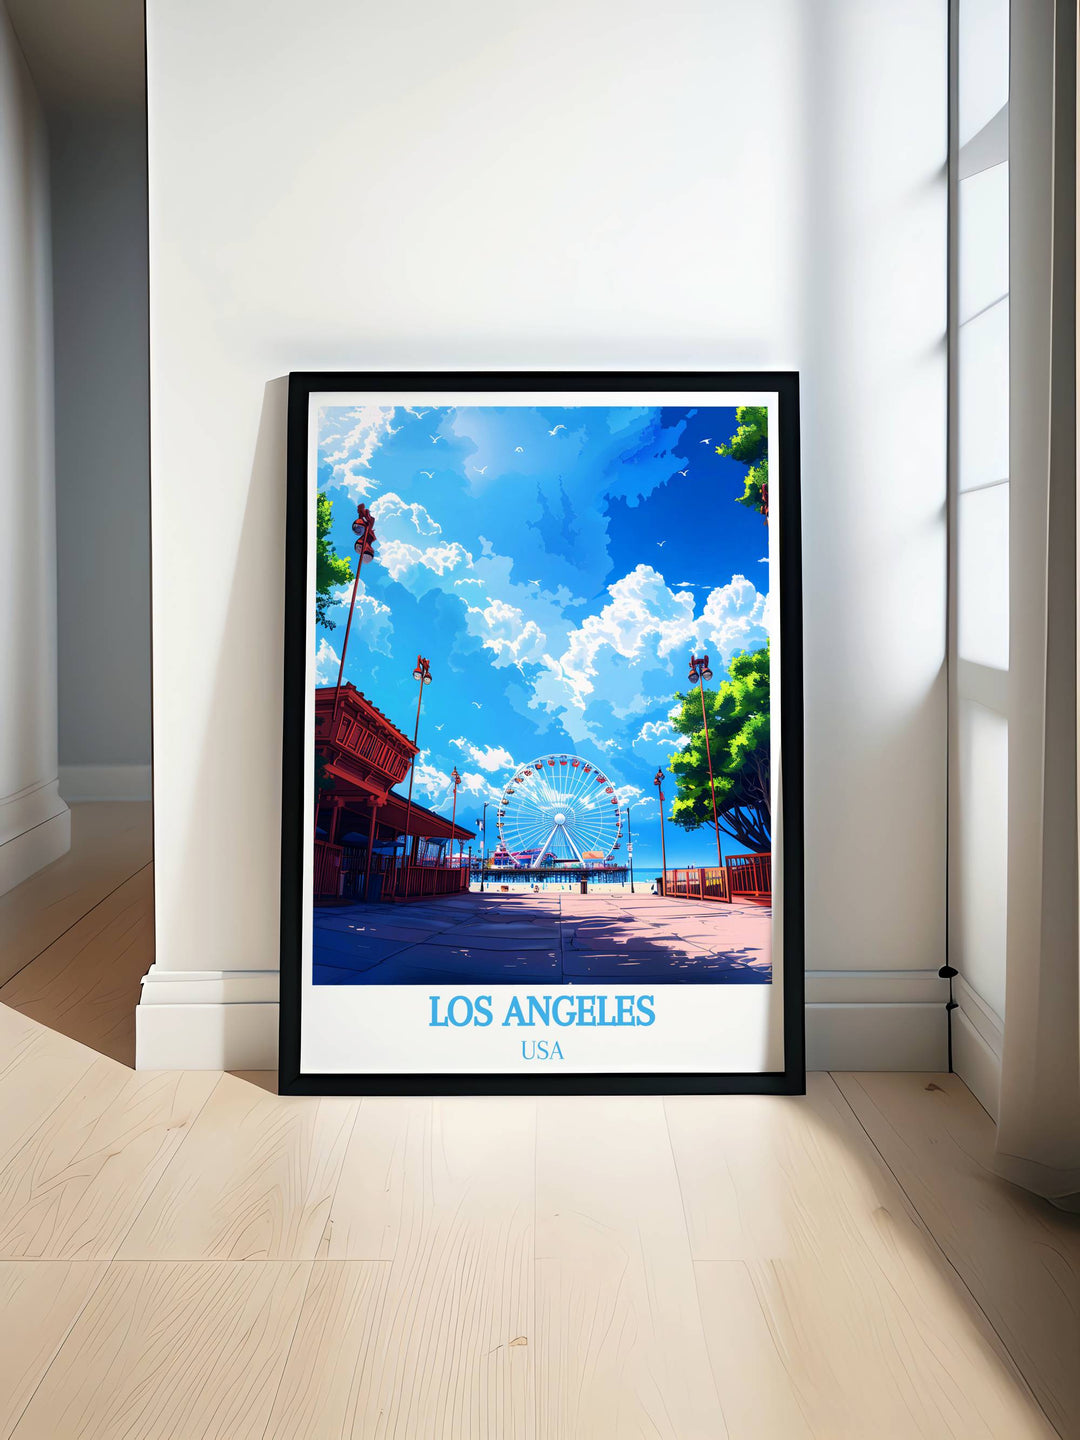 Framed art of Santa Monica Pier, capturing the vibrant atmosphere and ocean views, perfect for seaside decor.